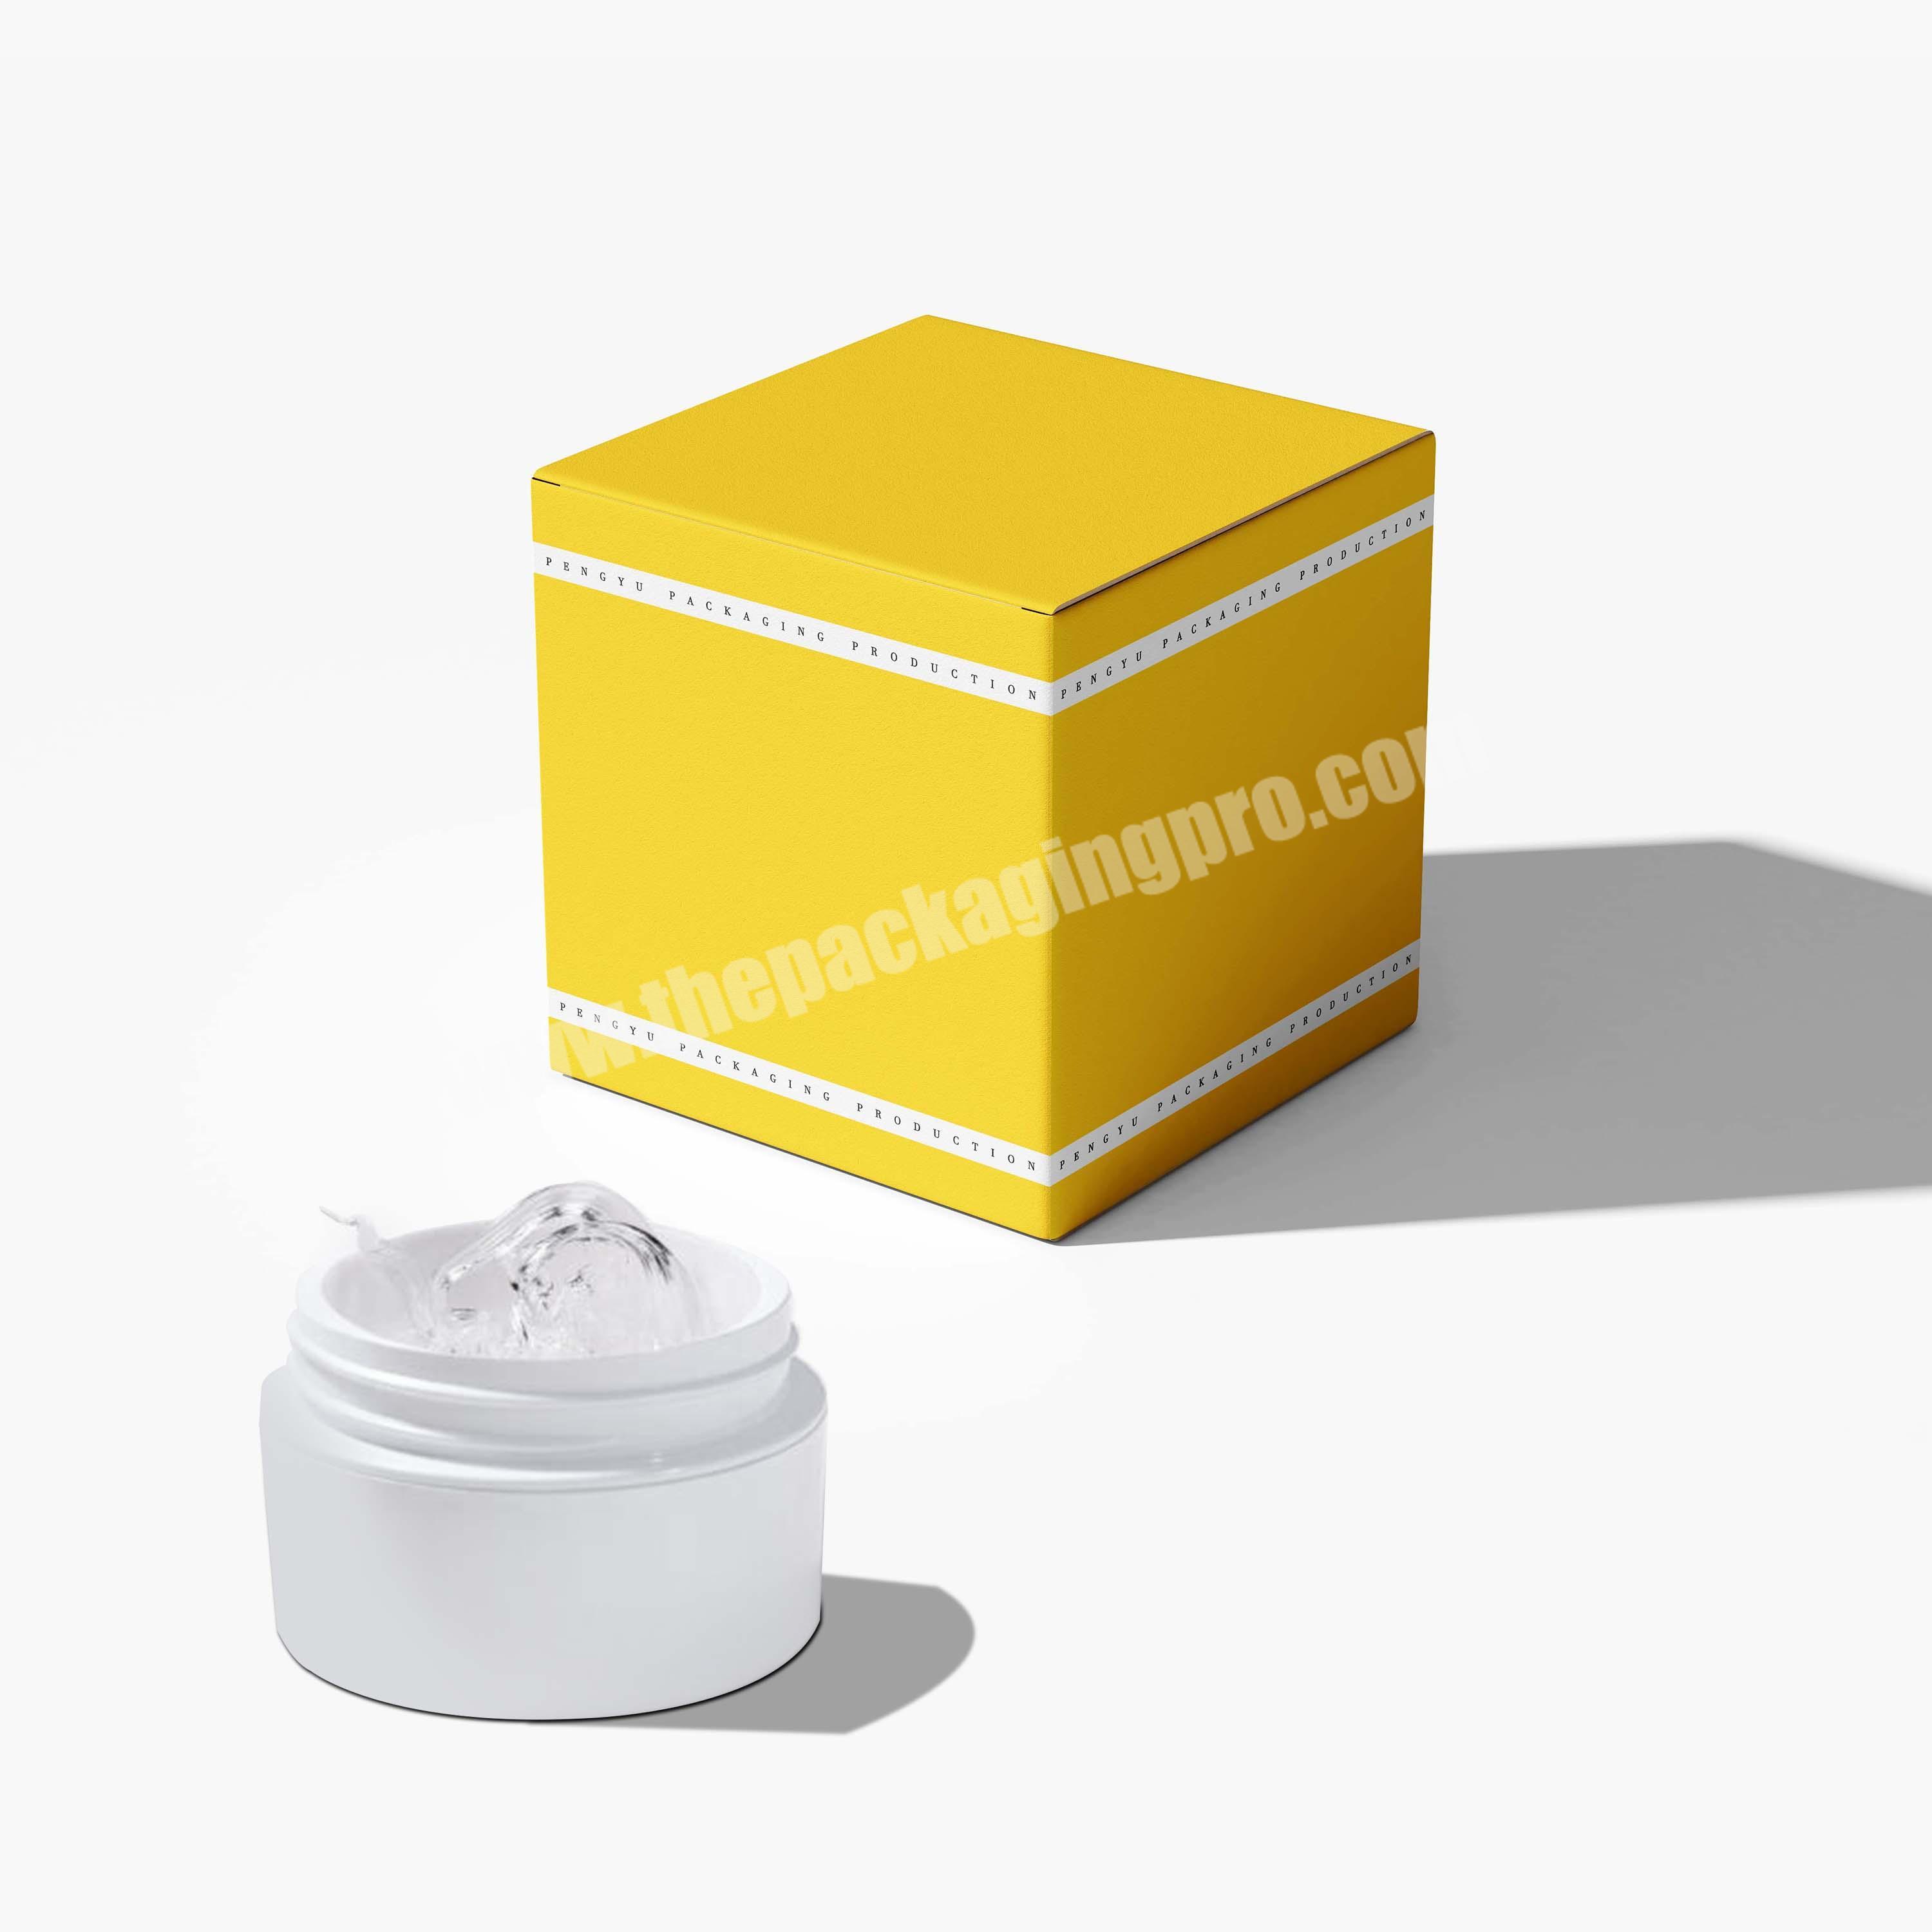 Design Luxury Boutique Nail Glue Biodegradable Gift Various Size Paper Box Packaging